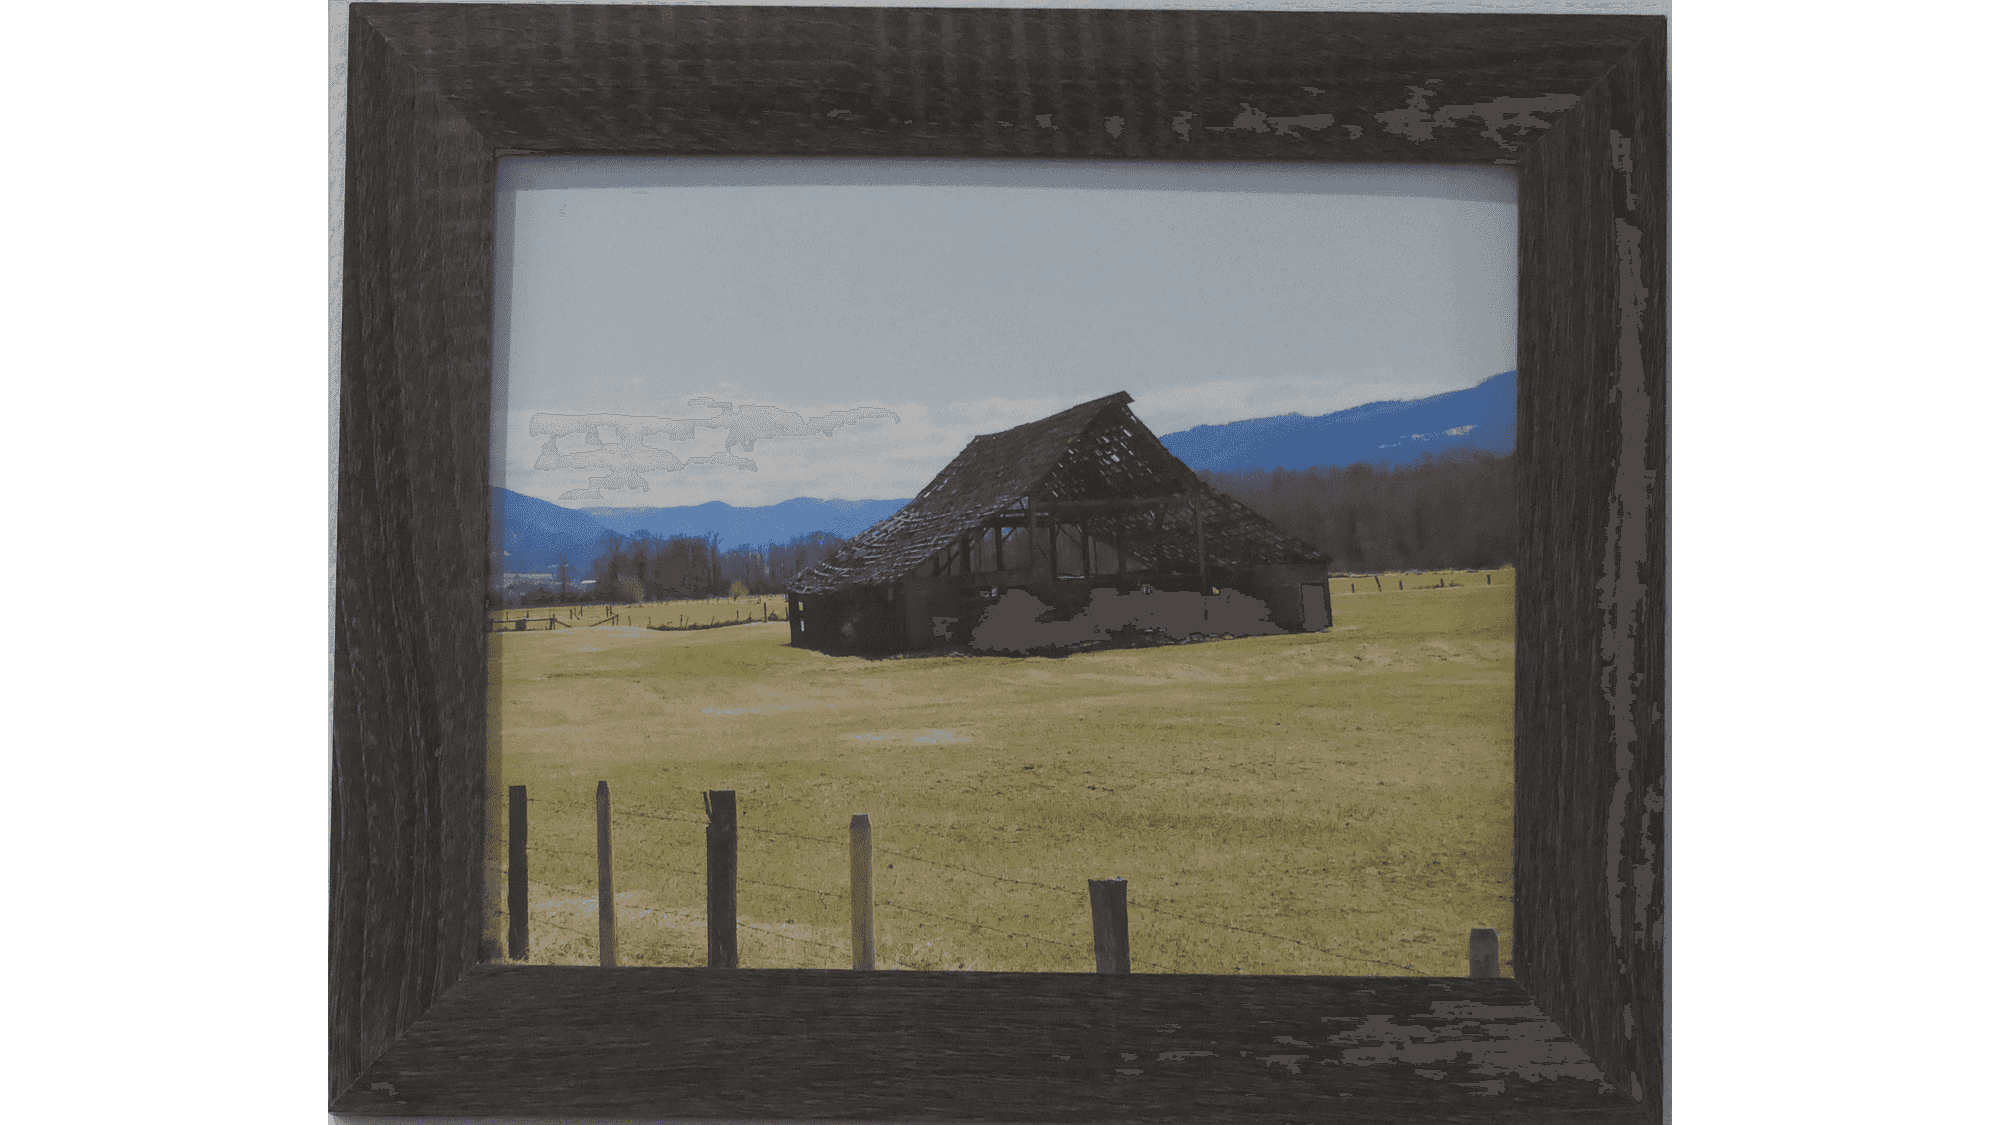 "Old Barn" by Janine Fisher